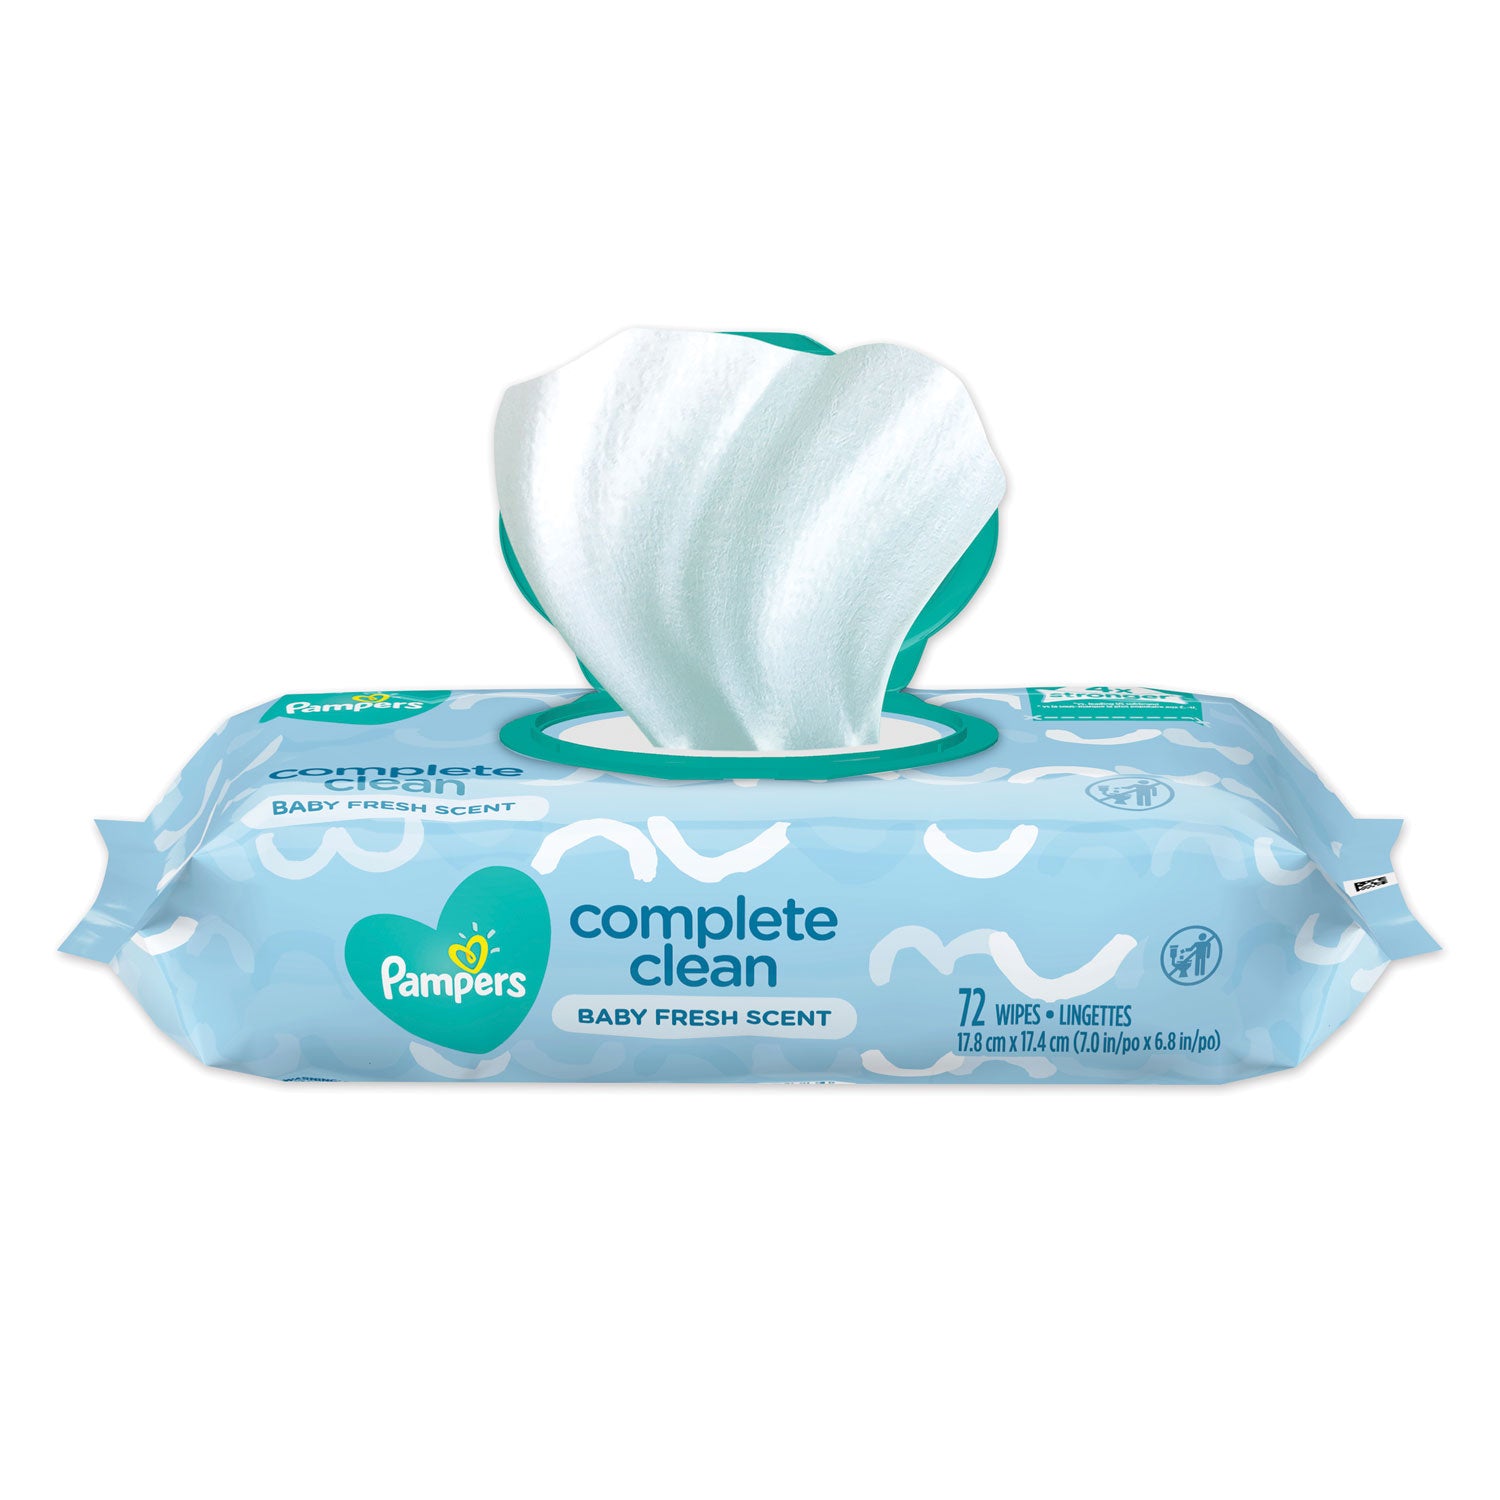 complete-clean-baby-wipes-1-ply-baby-fresh-7-x-68-white-72-wipes-pack-8-packs-carton_pgc75536 - 1